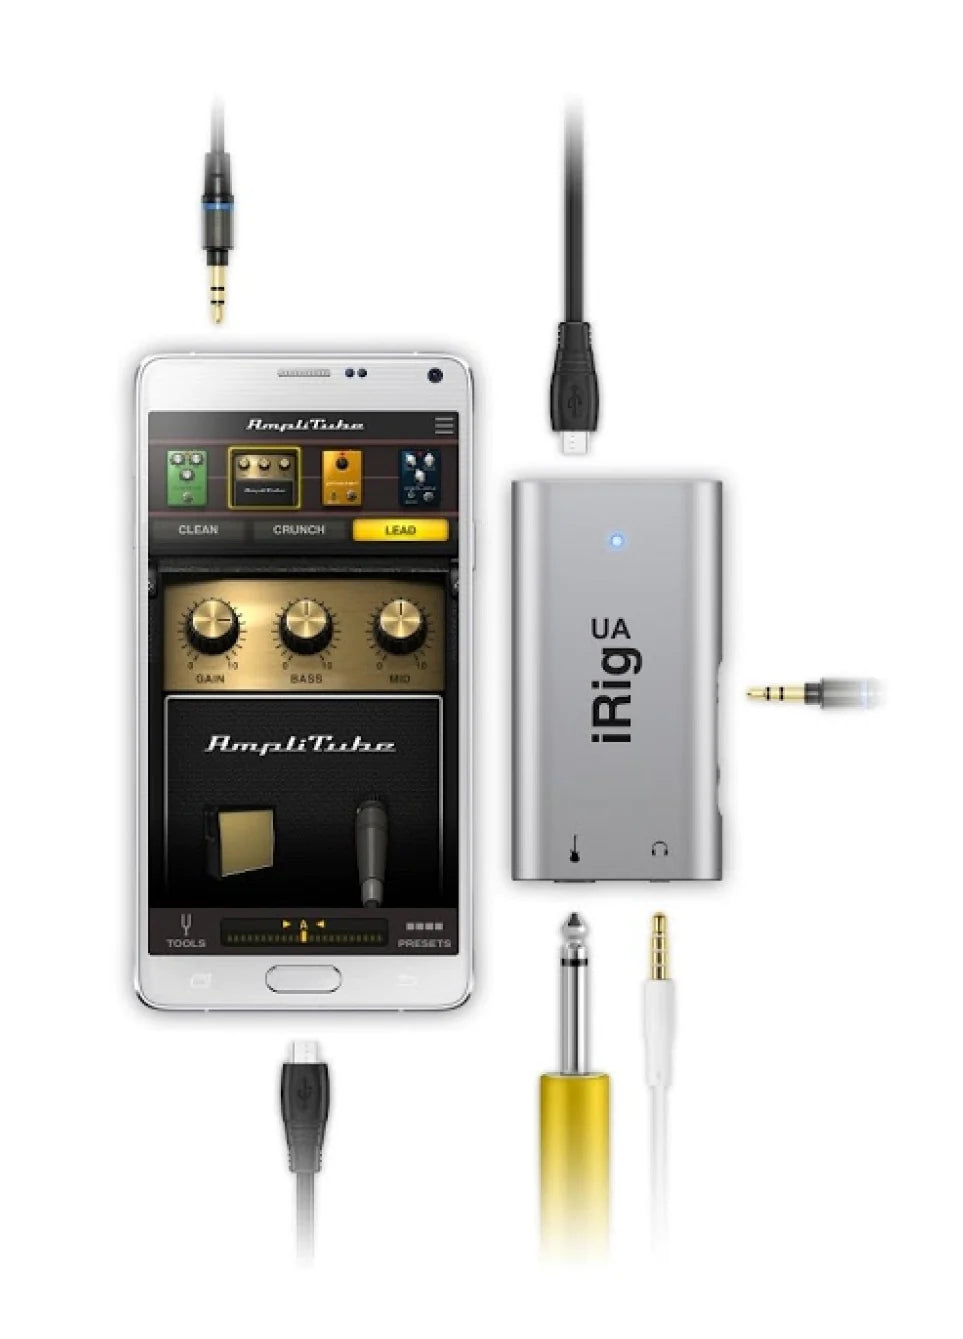 iRig UA Guitar Effects Processor/Audio Interface Android